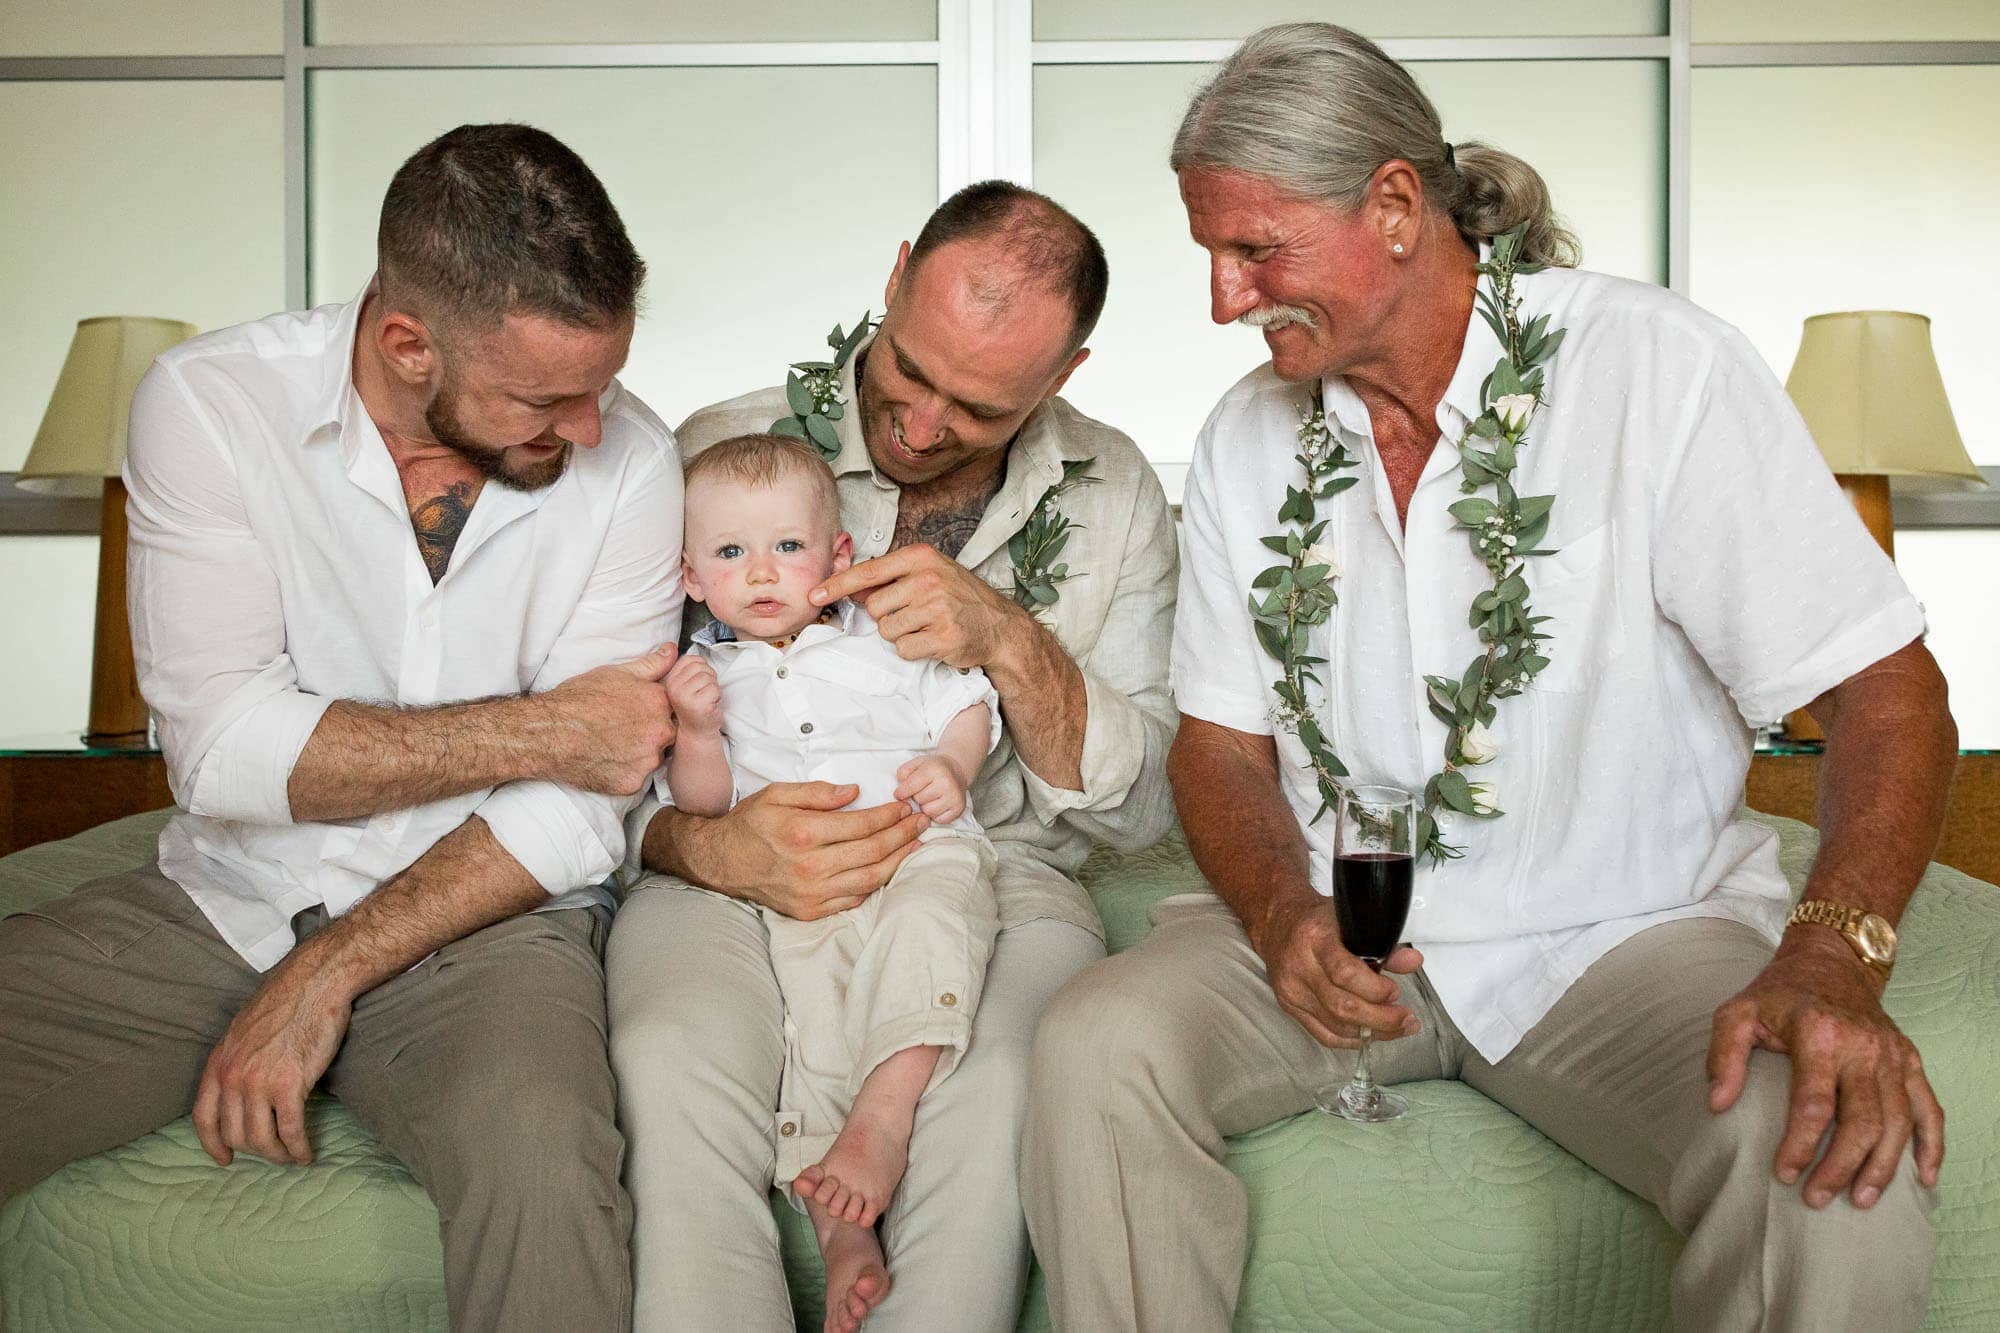 Groomsmen playing with the baby